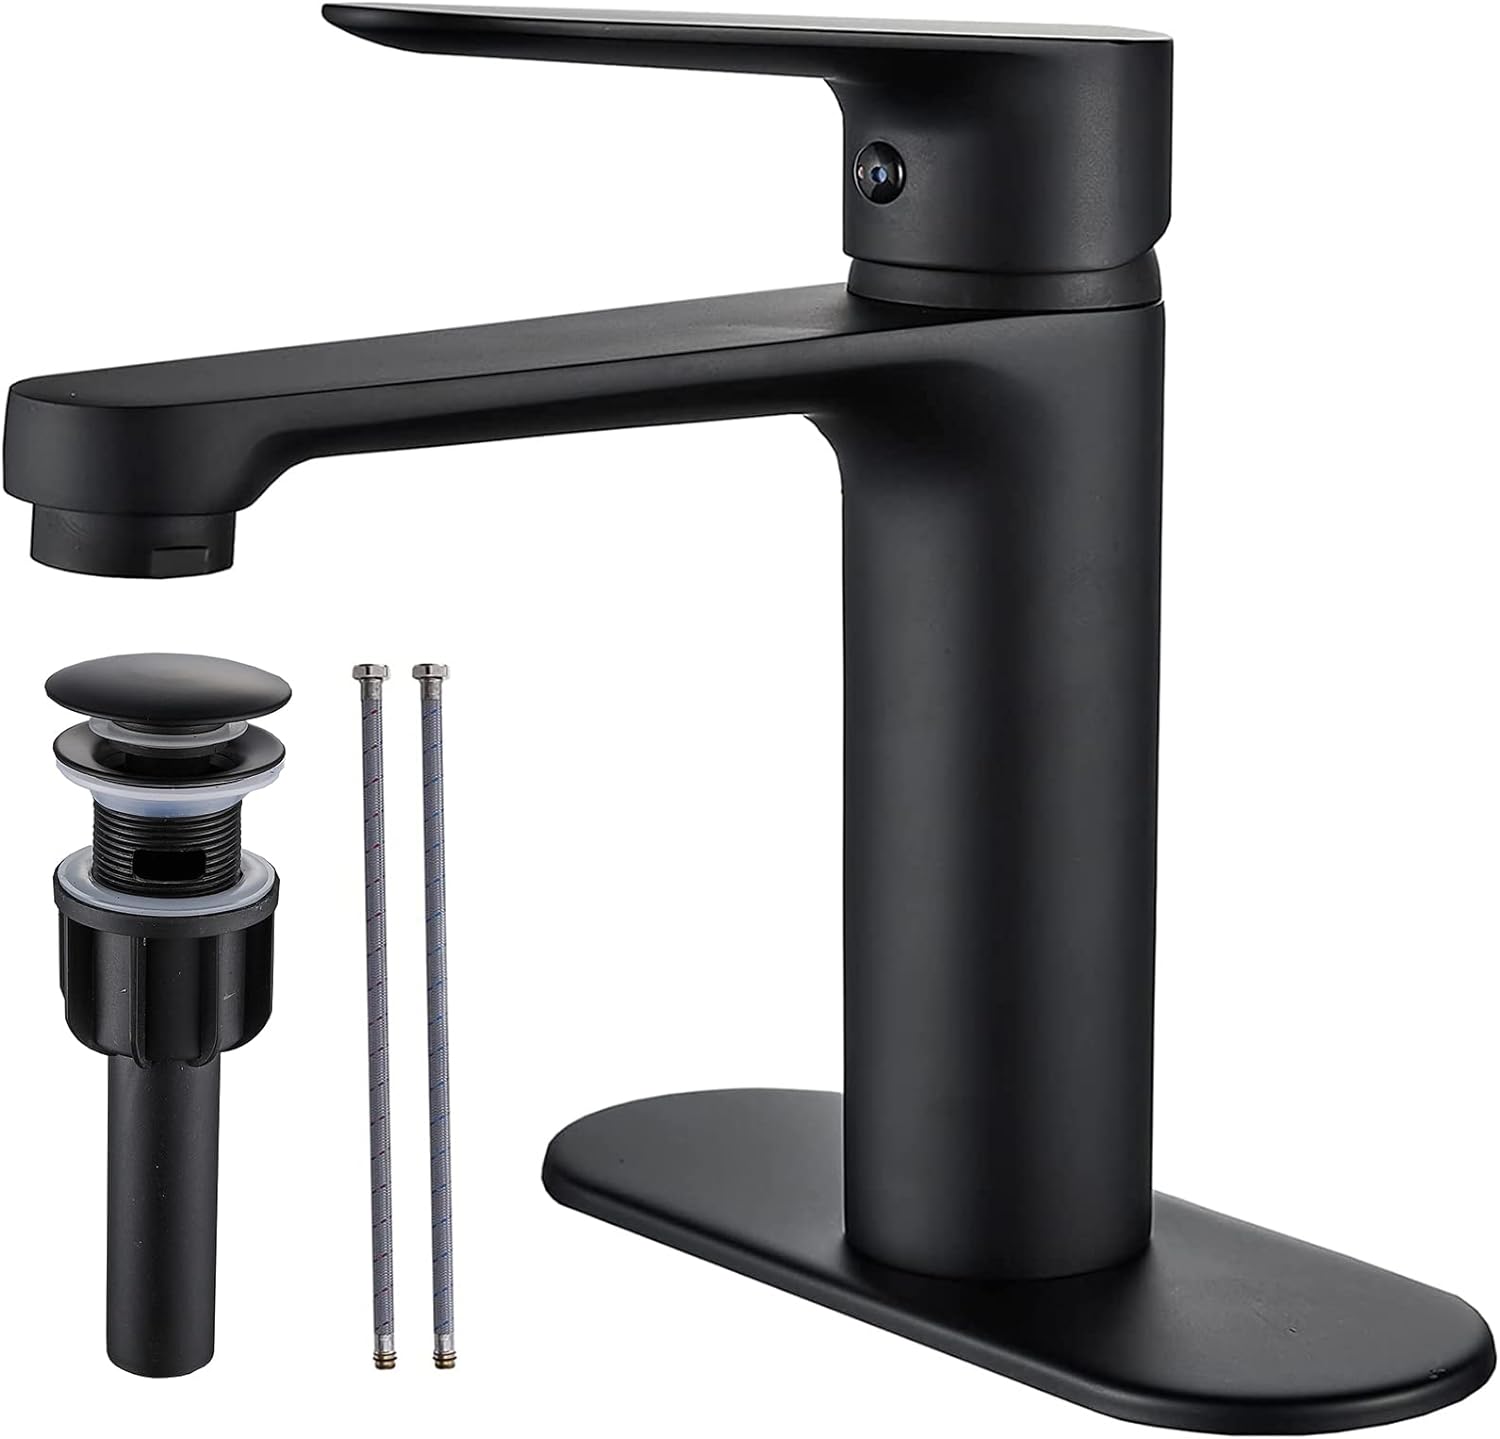 nice faucet, good design (only few parts to install, no need to use plumber' putty, good gaskets), very easy to install (took only few minutes to tight few things), easy to follow instructions, good materials, well made